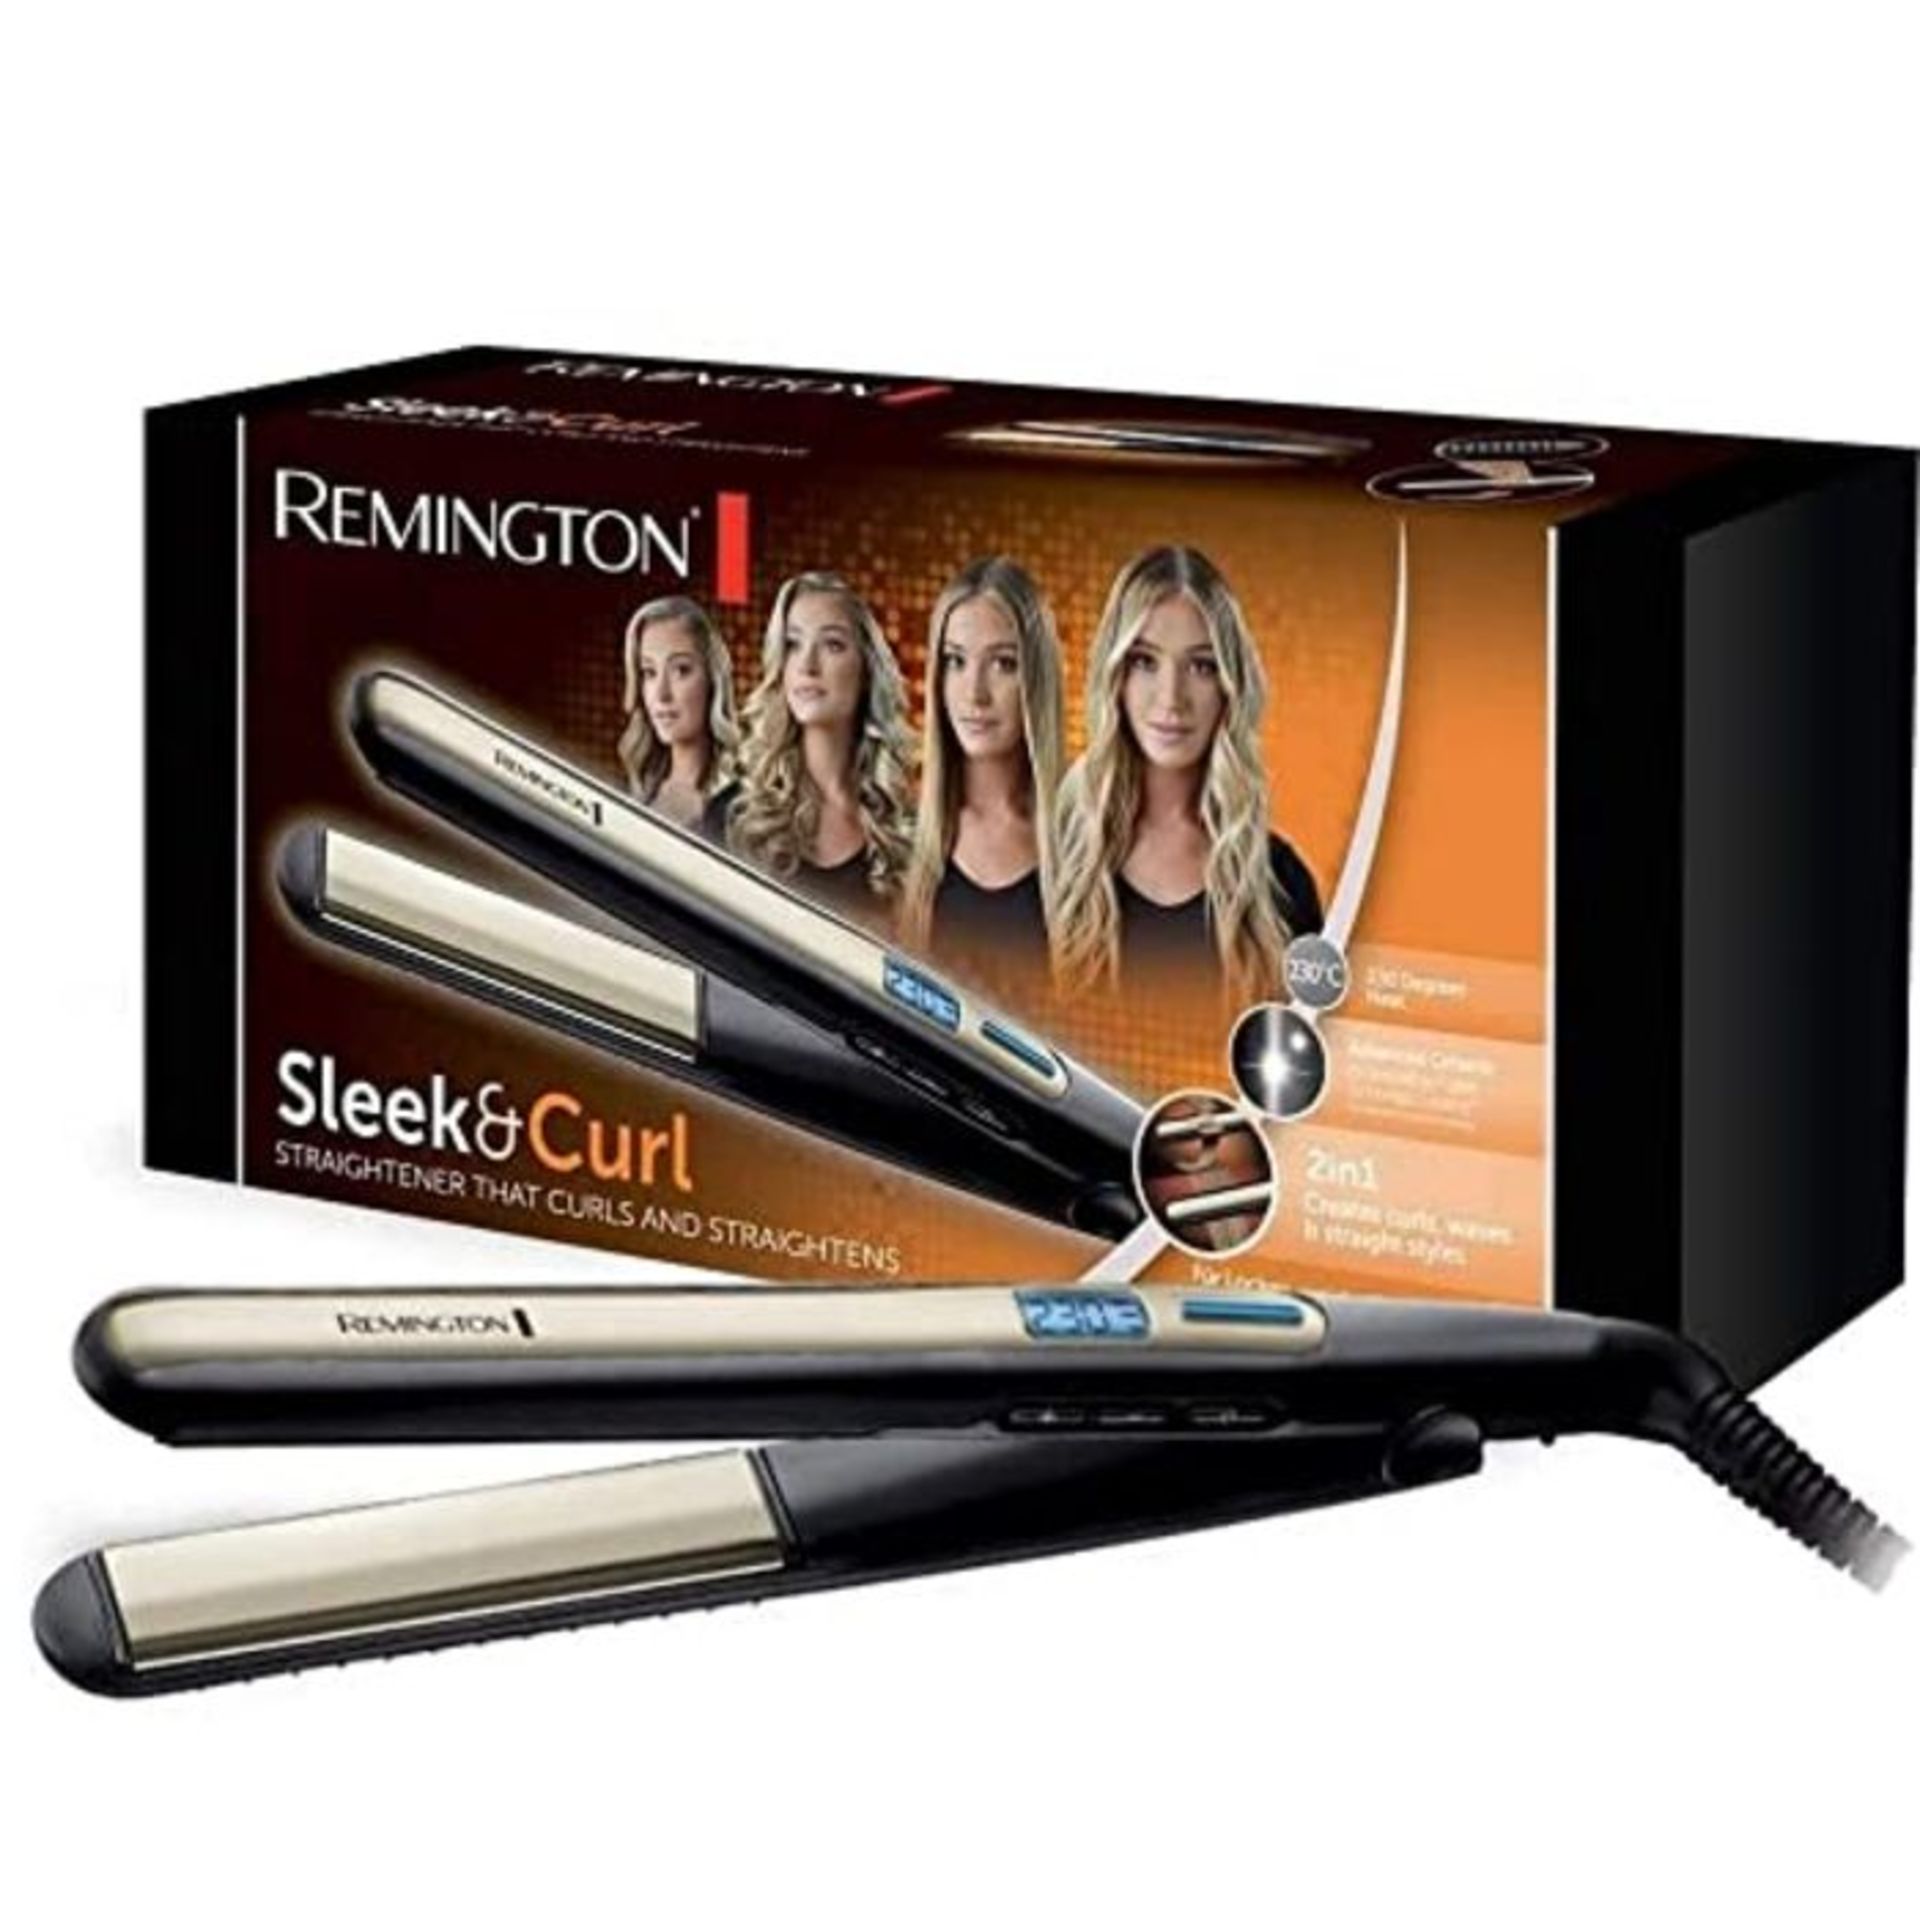 Remington Hair Straightener with Functionality of Curling Iron From Sleek & Curl S 650